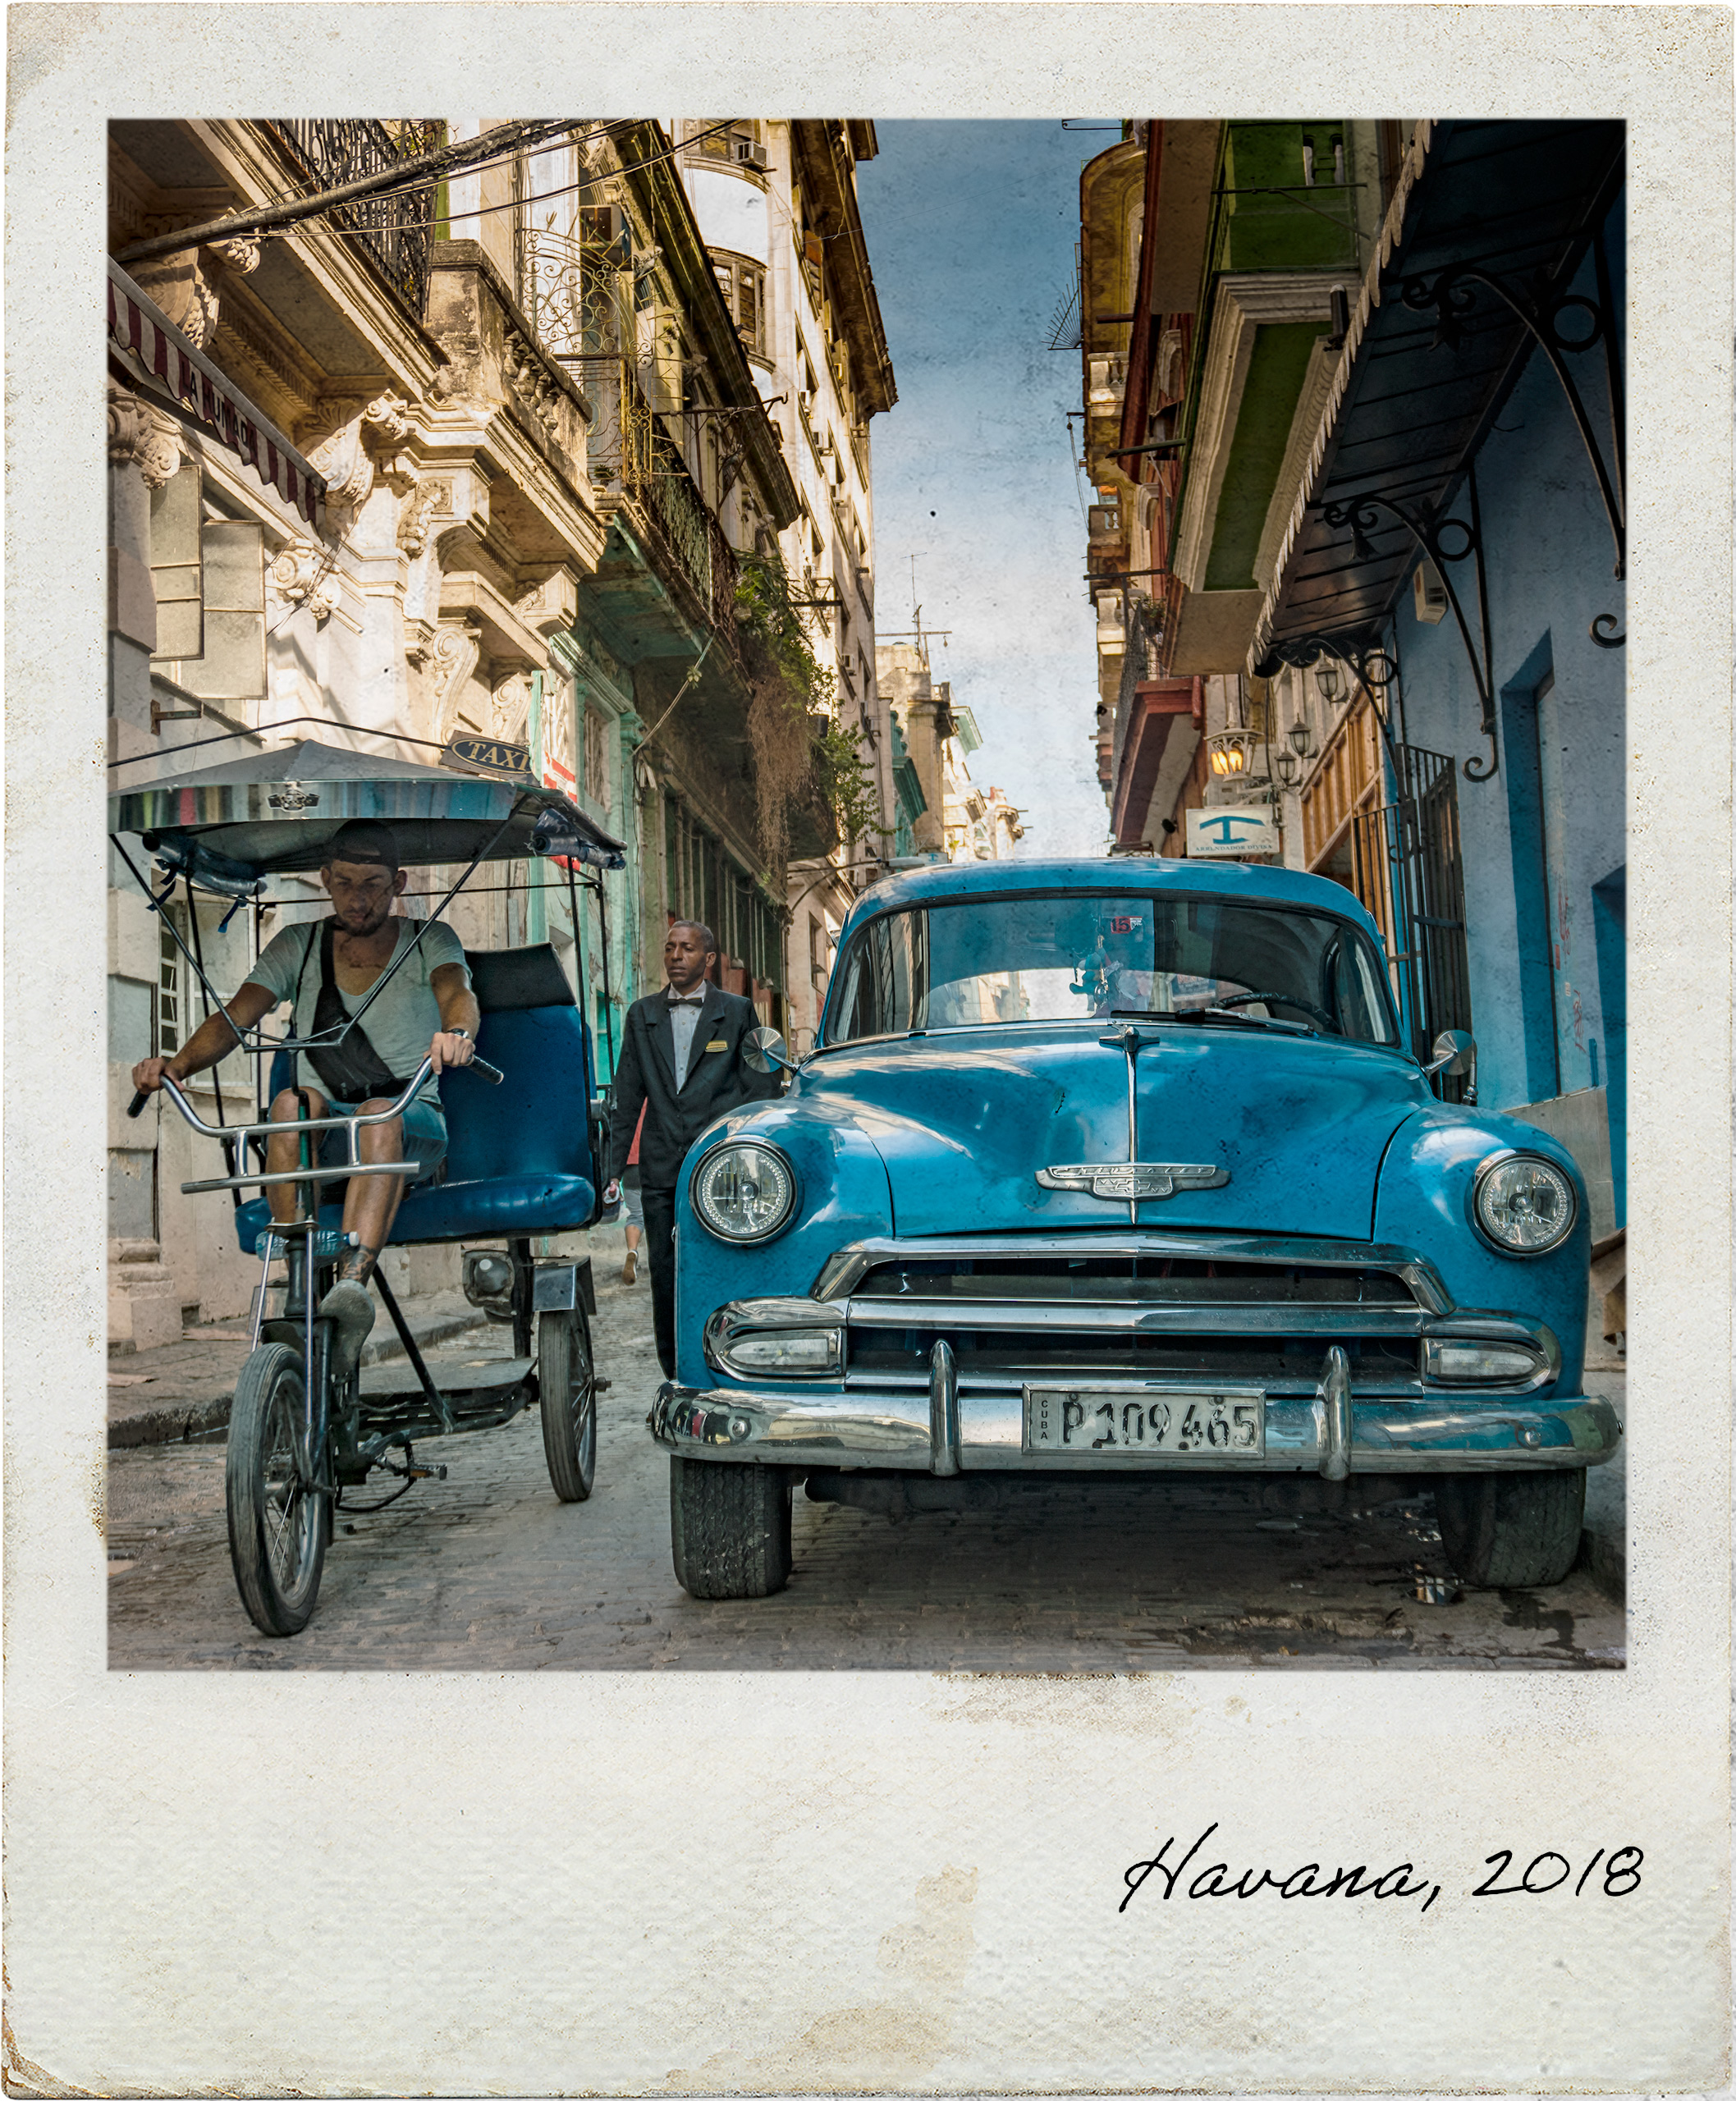 Old car and bicitaxi in Havana Vieja